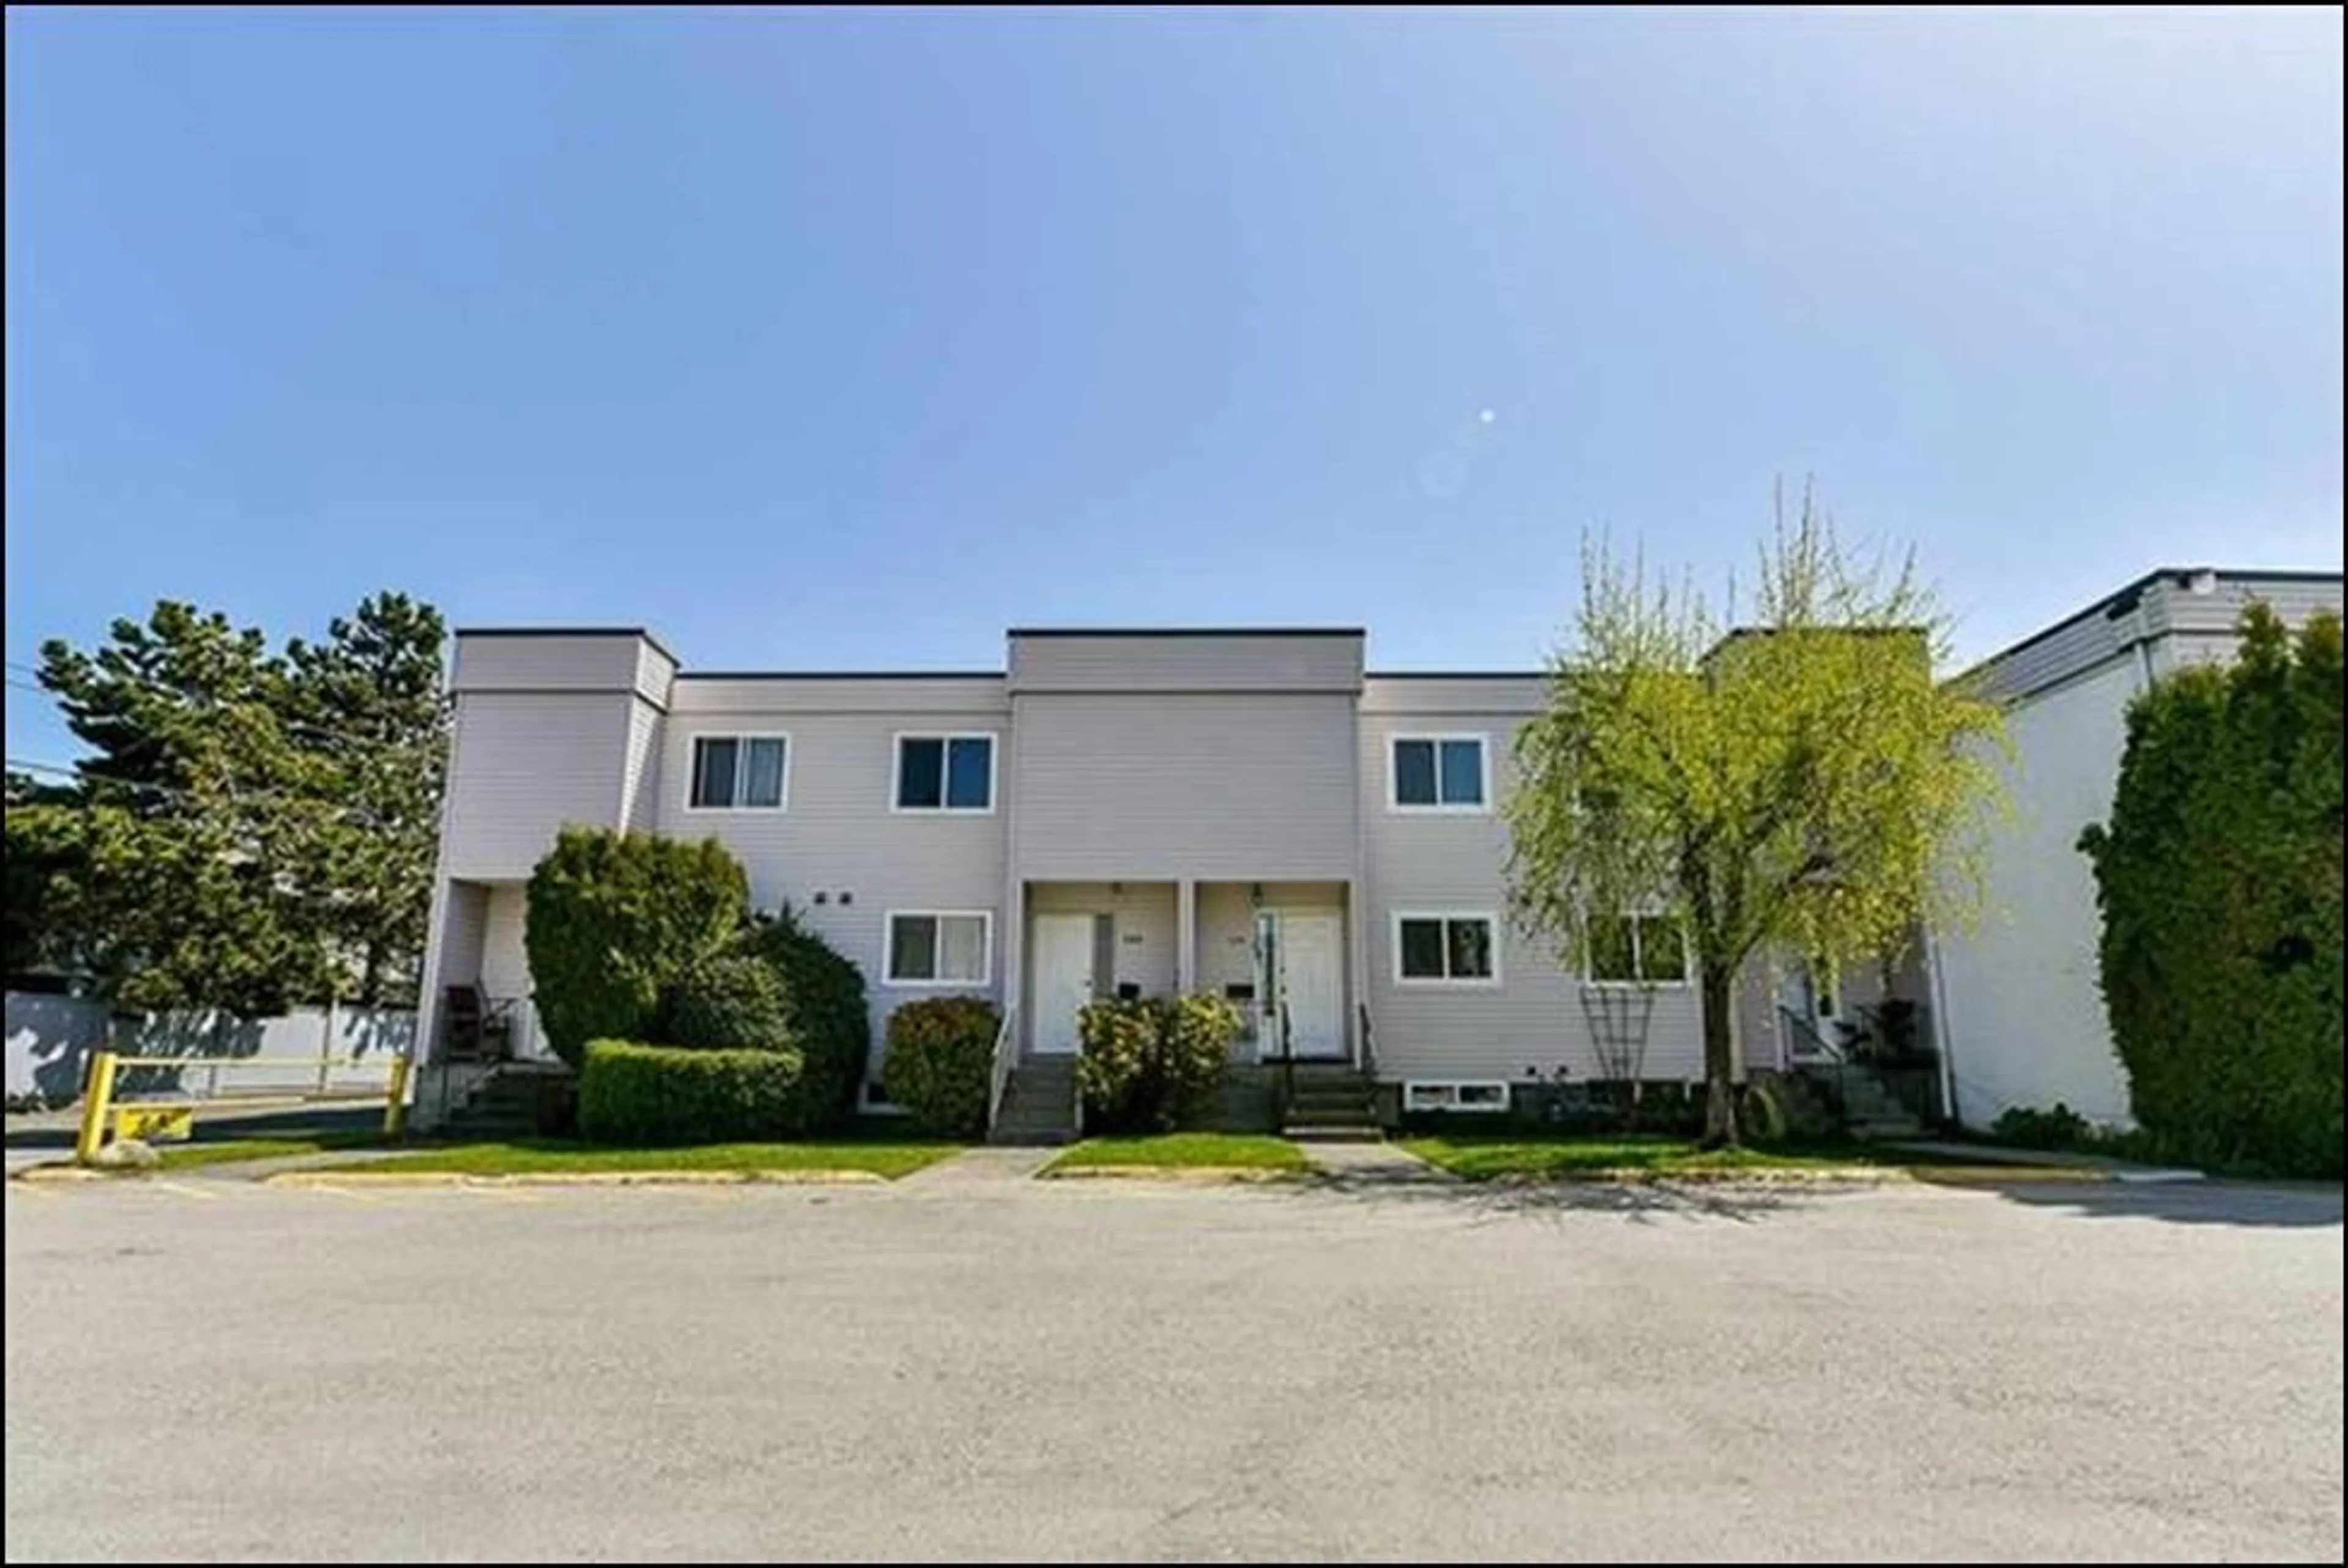 A pic from exterior of the house or condo for 106 11901 89A AVENUE, Delta British Columbia V4C3G8